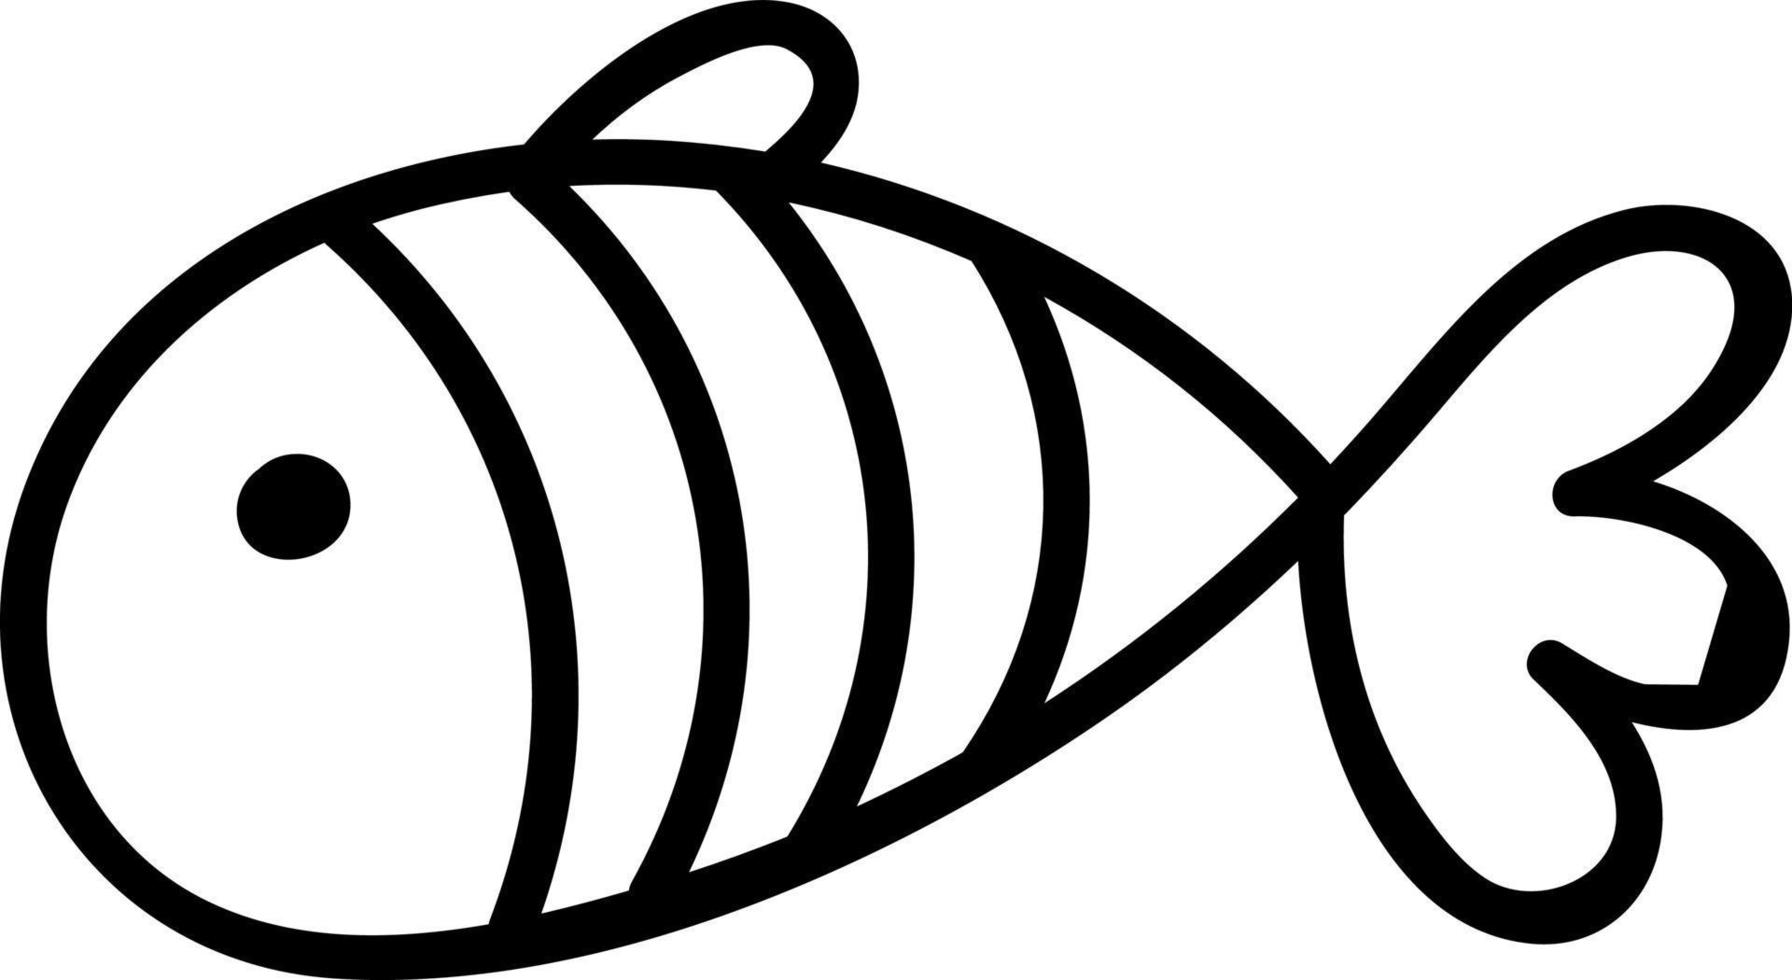 White fish with three stripes, illustration, vector on white background.